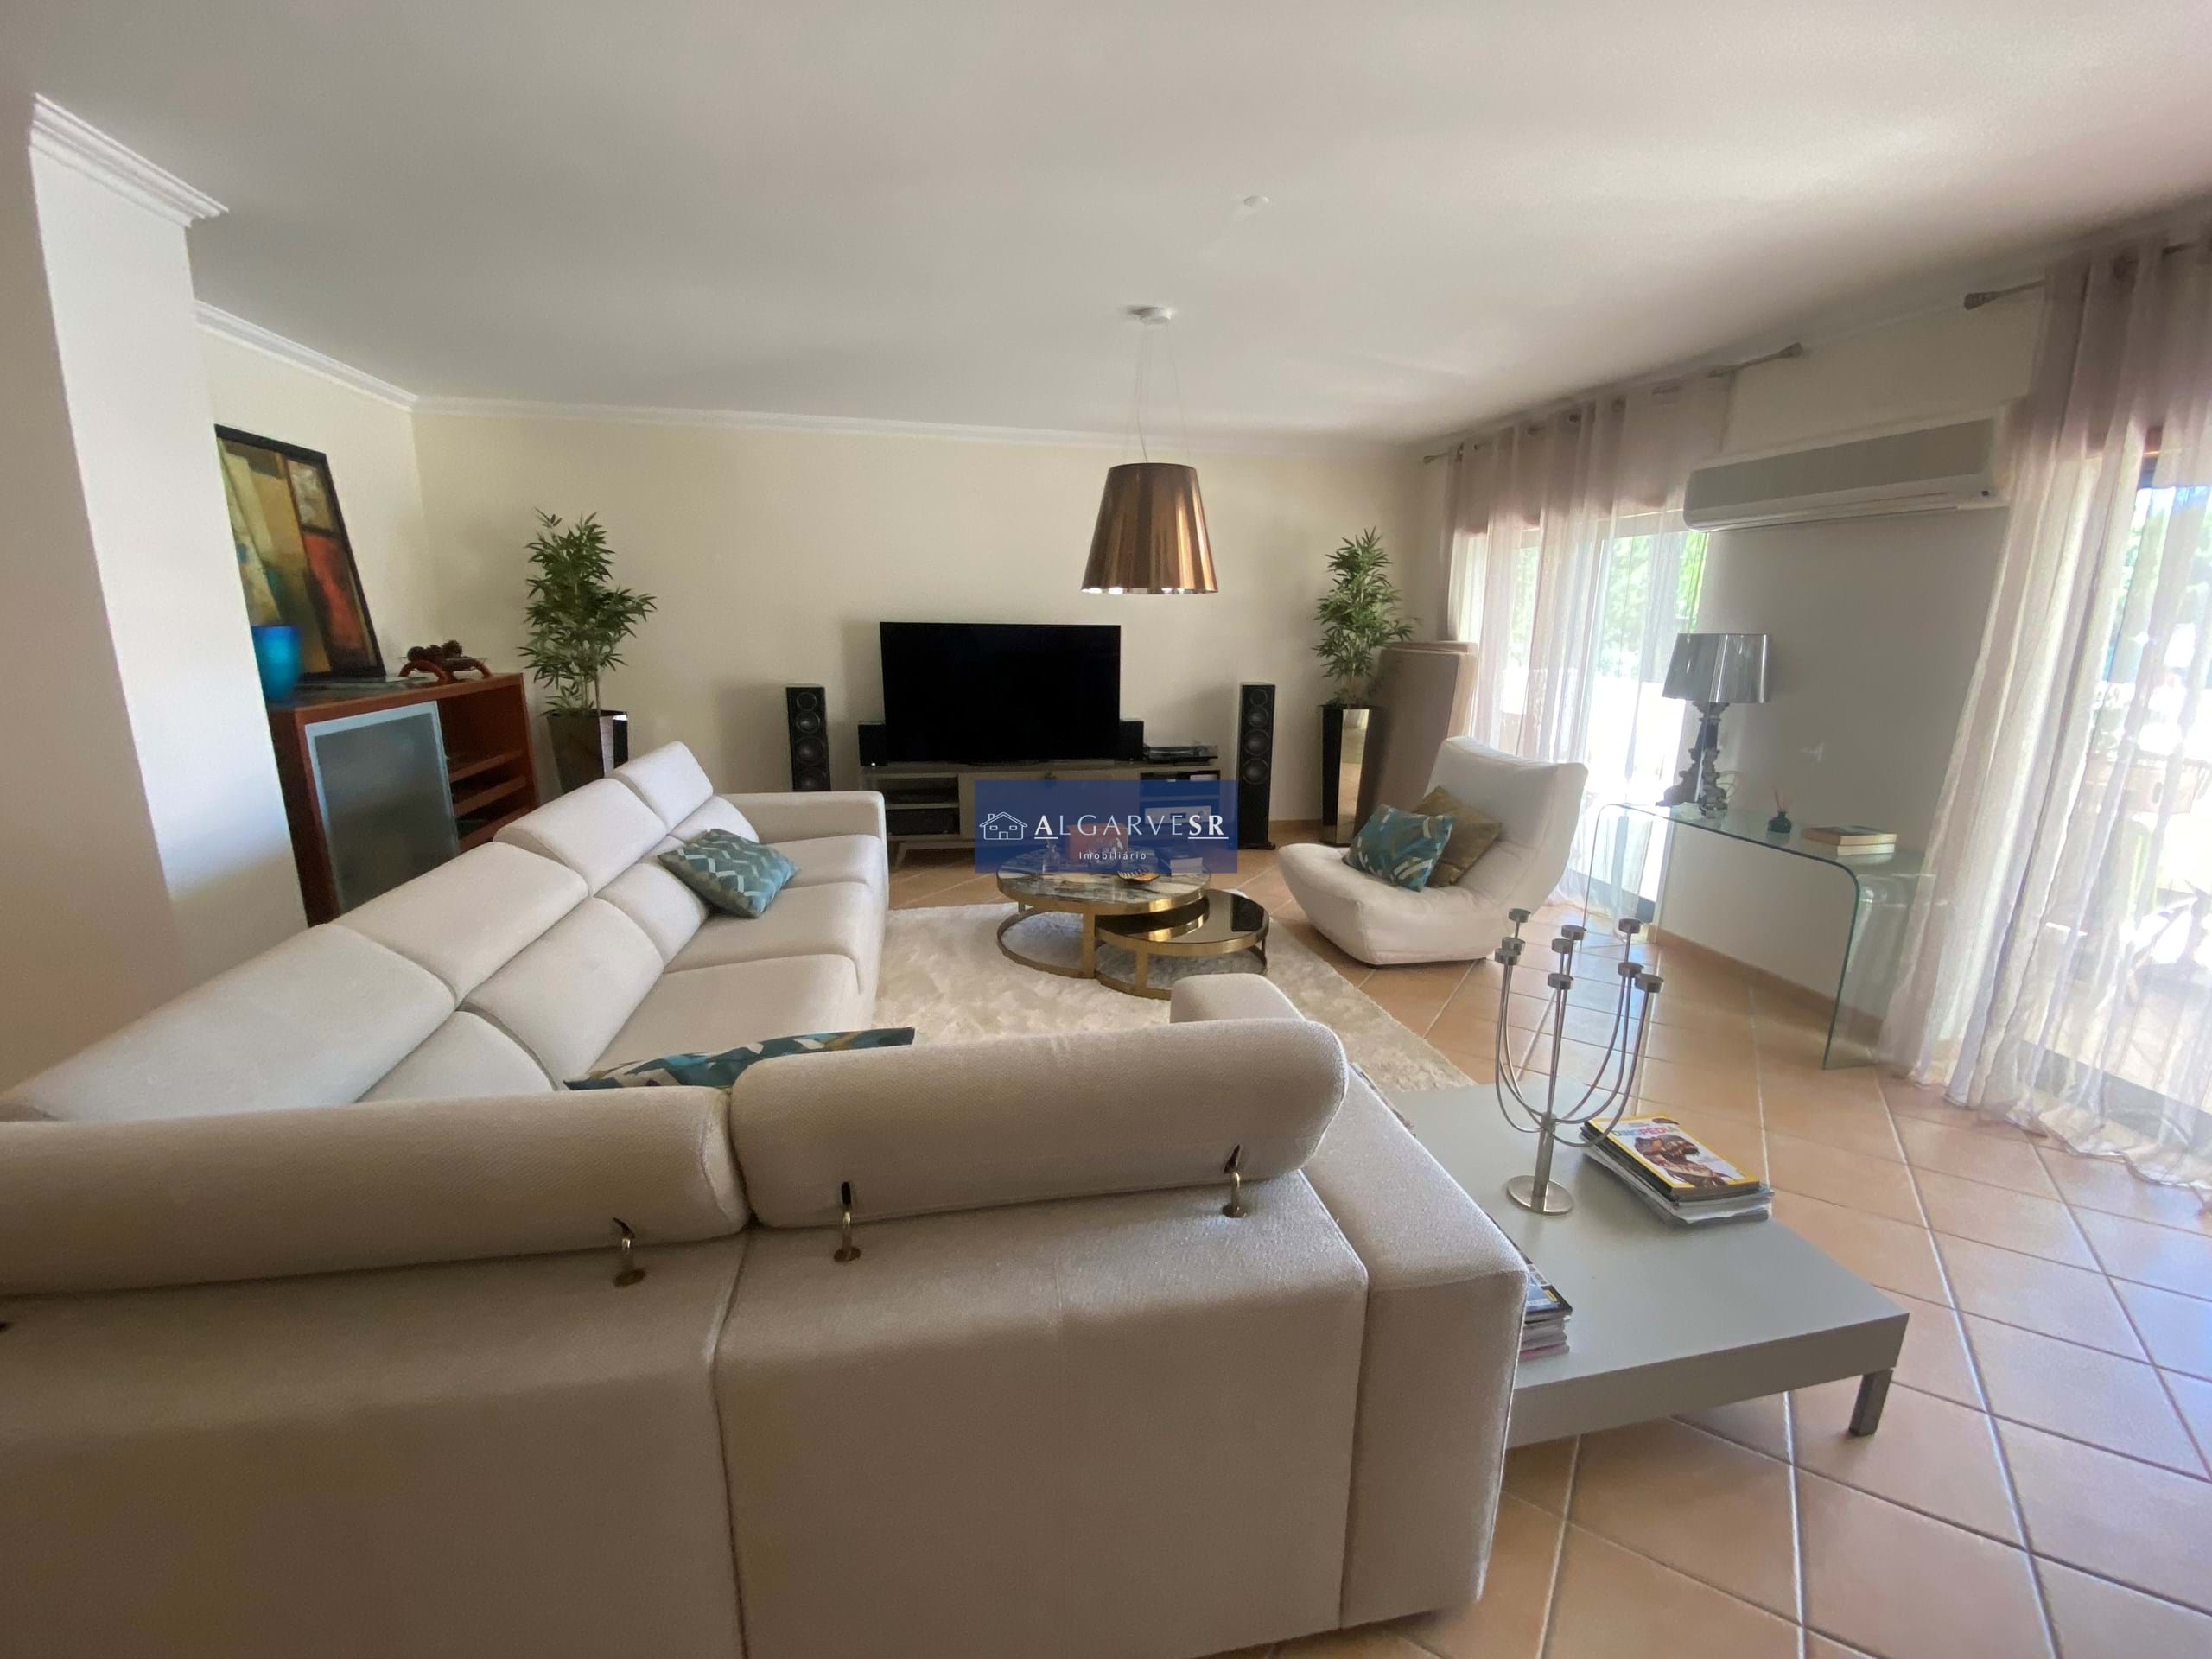 Fabulous three bedroom apartment on luxury complex, few moments from Falesia beach